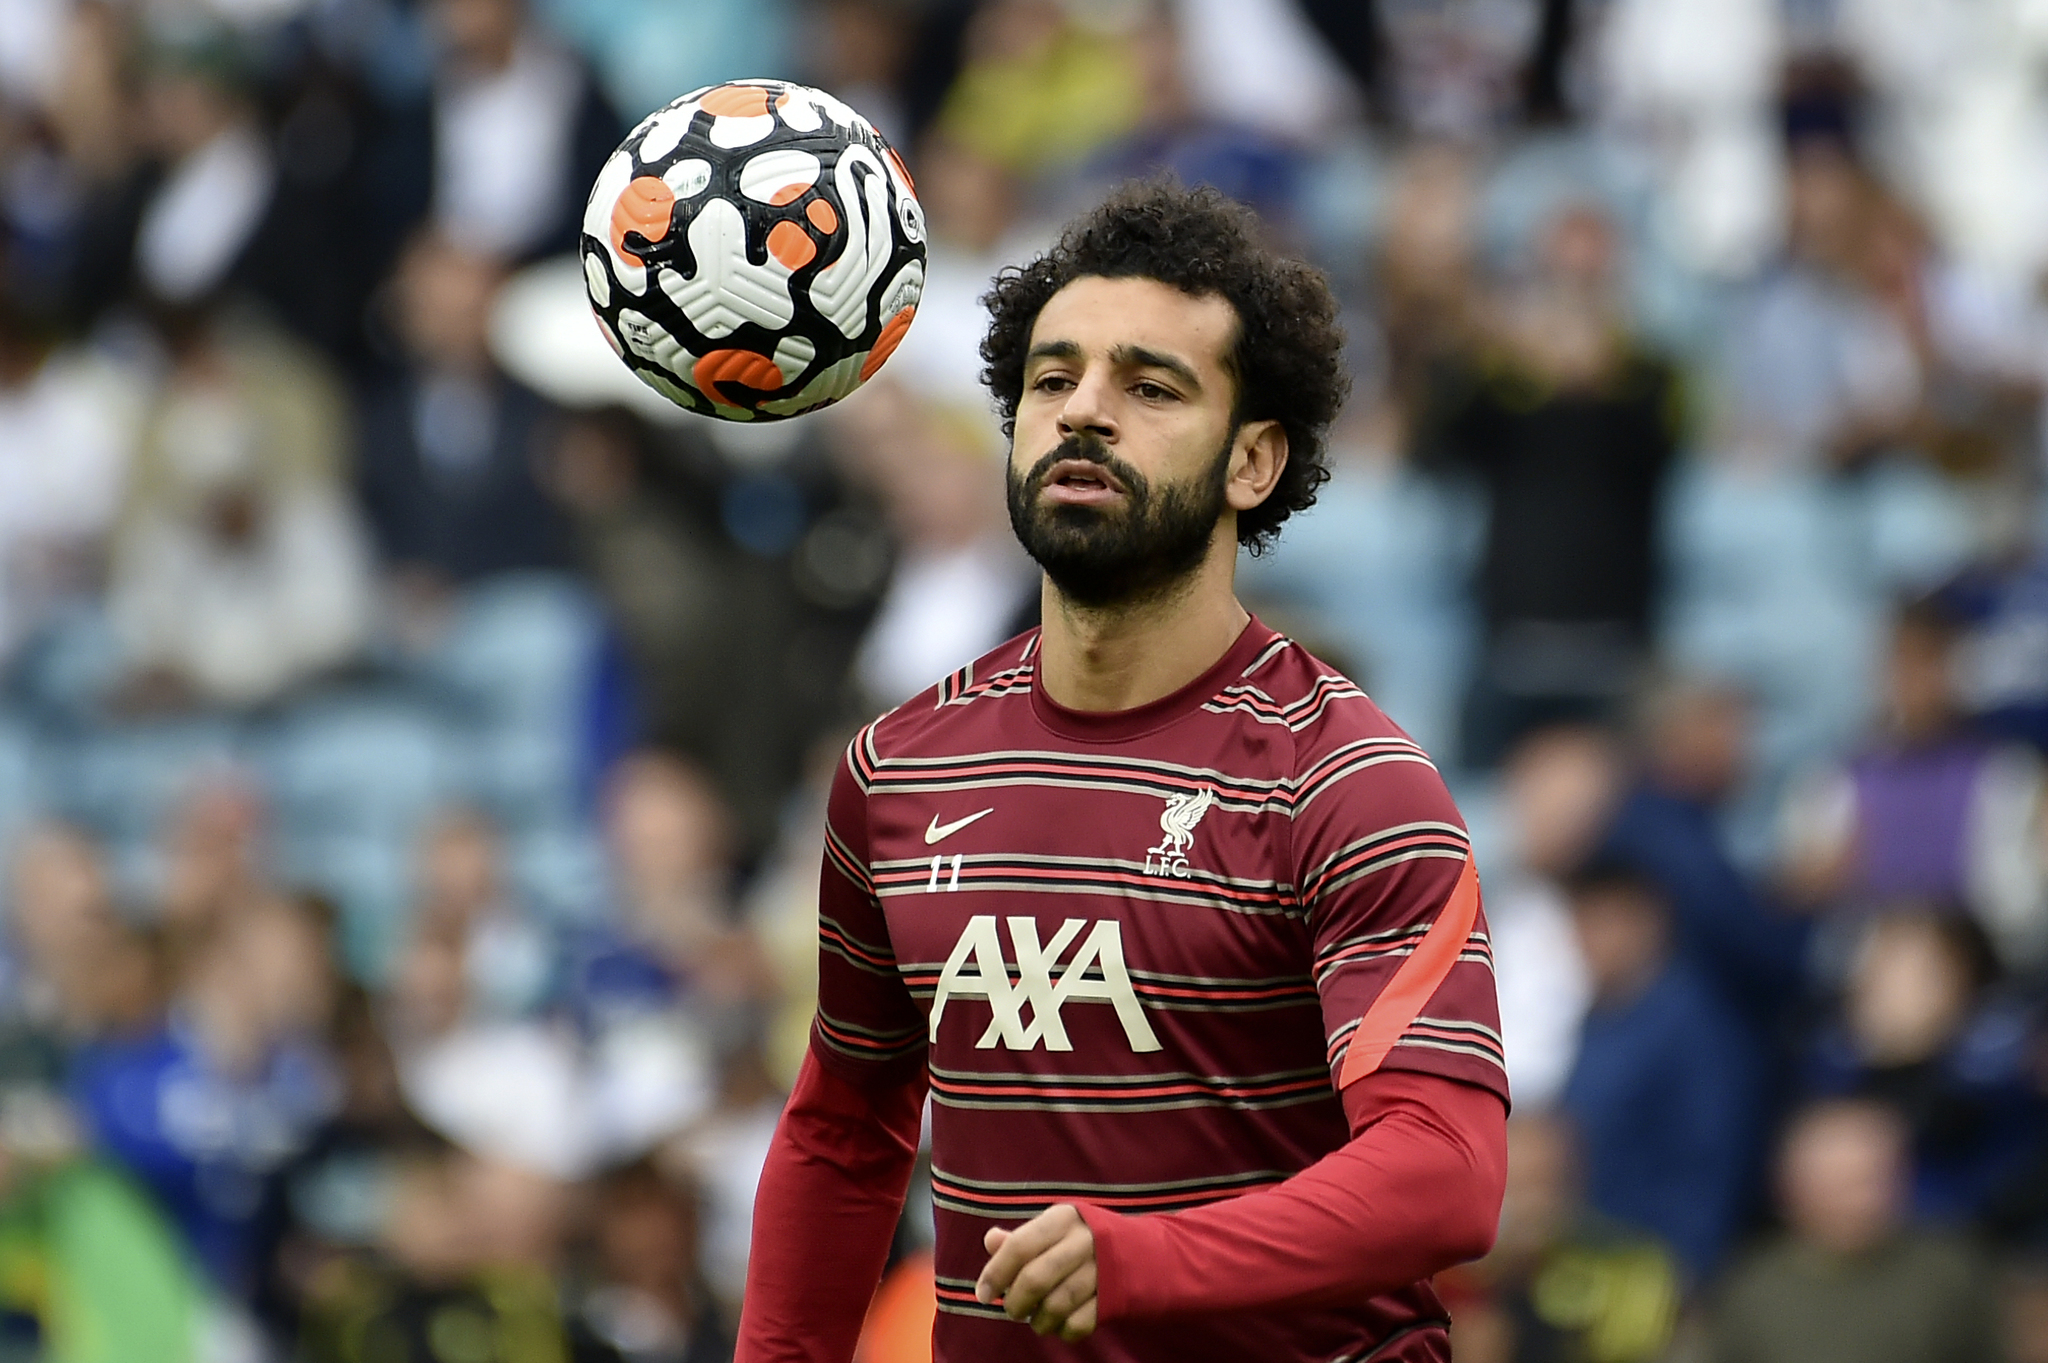 Liverpool's Mohamed Salah is on good form.